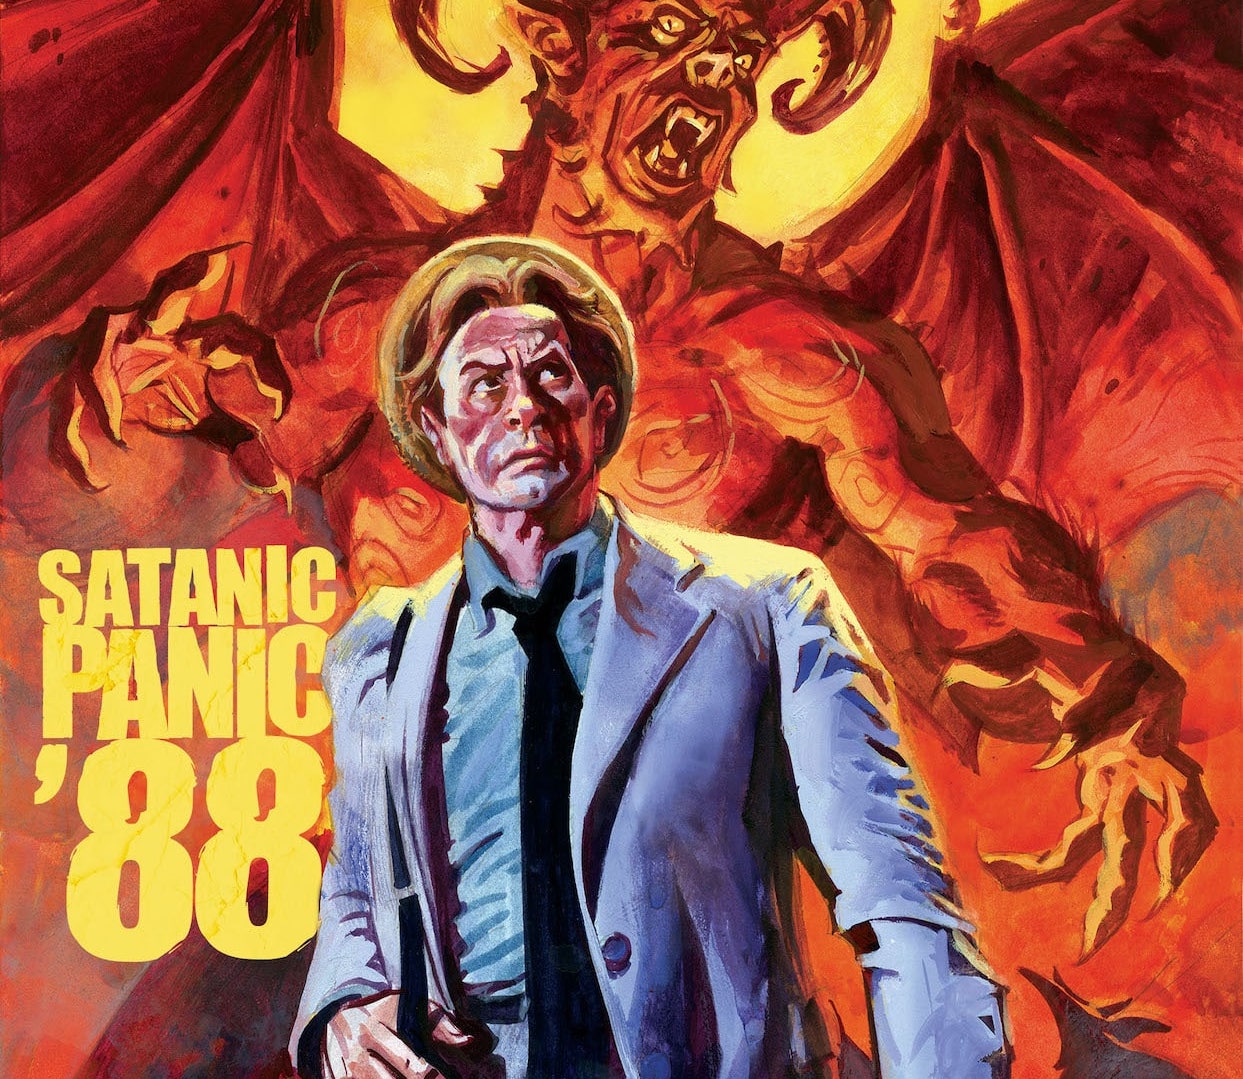 Some insight into Kolchak graphic novel from editor James Aquilone